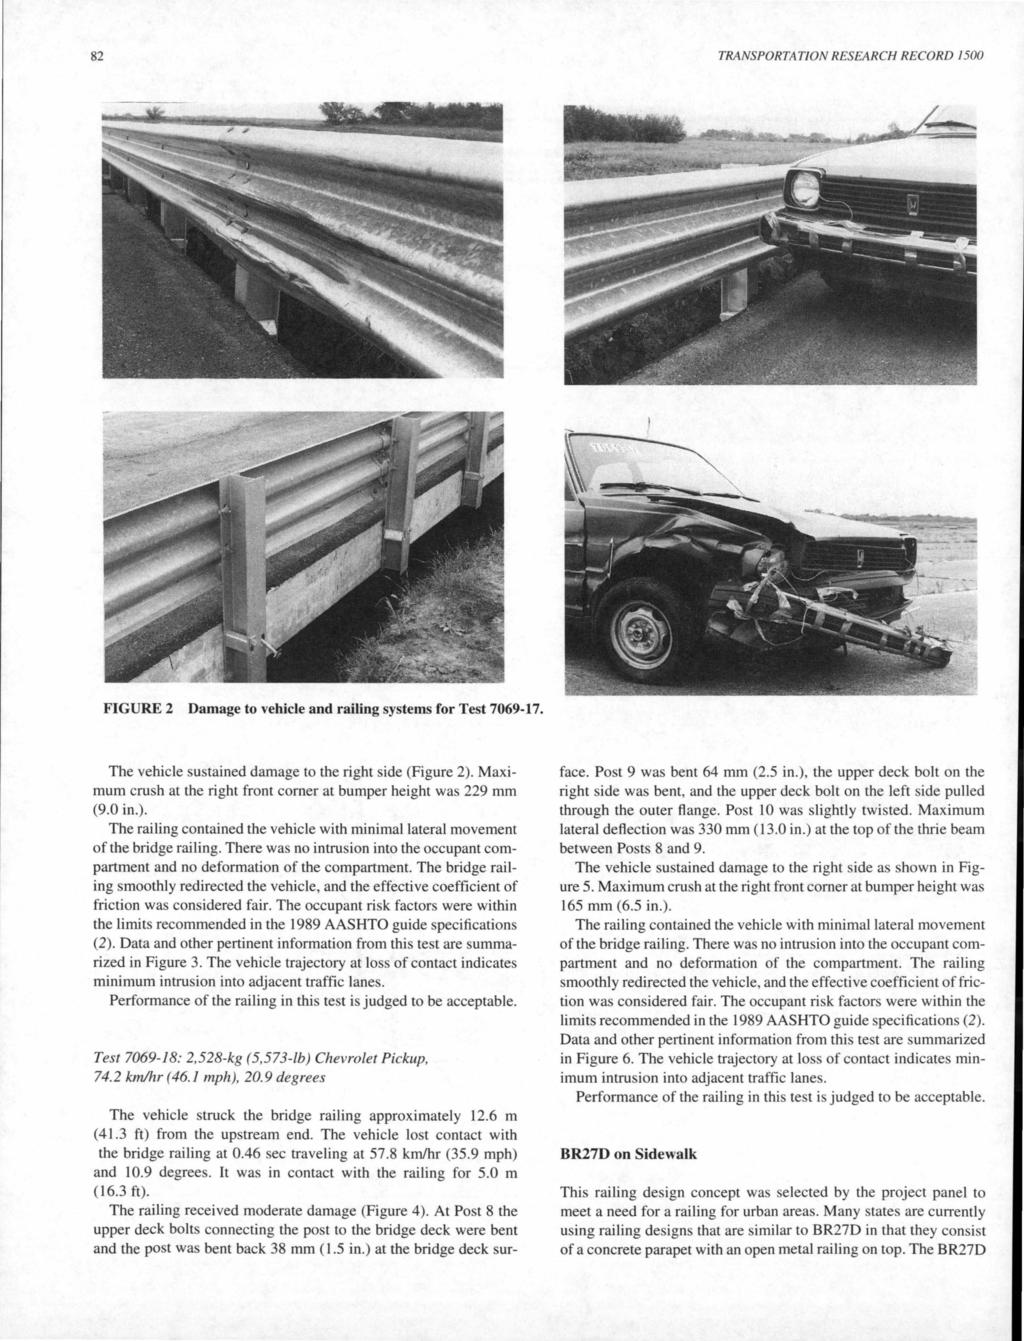 82 TRANSPORTATION RESEARCH RECORD 1500 FIGURE 2 Damage to vehicle and railing systems for Test 7069-17. The vehicle sustained damage to the right side (Figure 2).